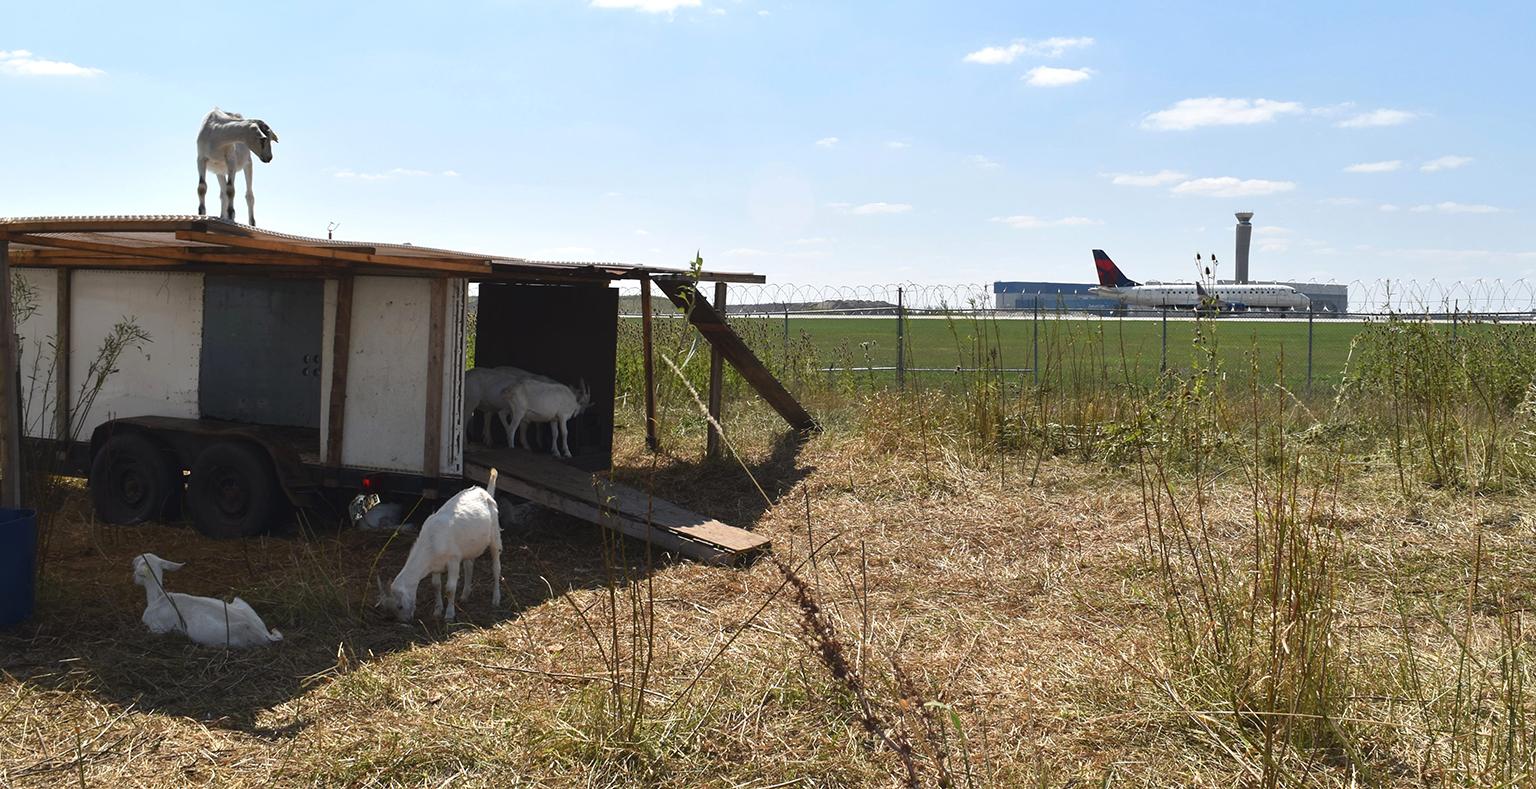 Goats help clear vegetation near the airfield at O'Hare International Airport. (Courtesy Chicago Department of Aviation)